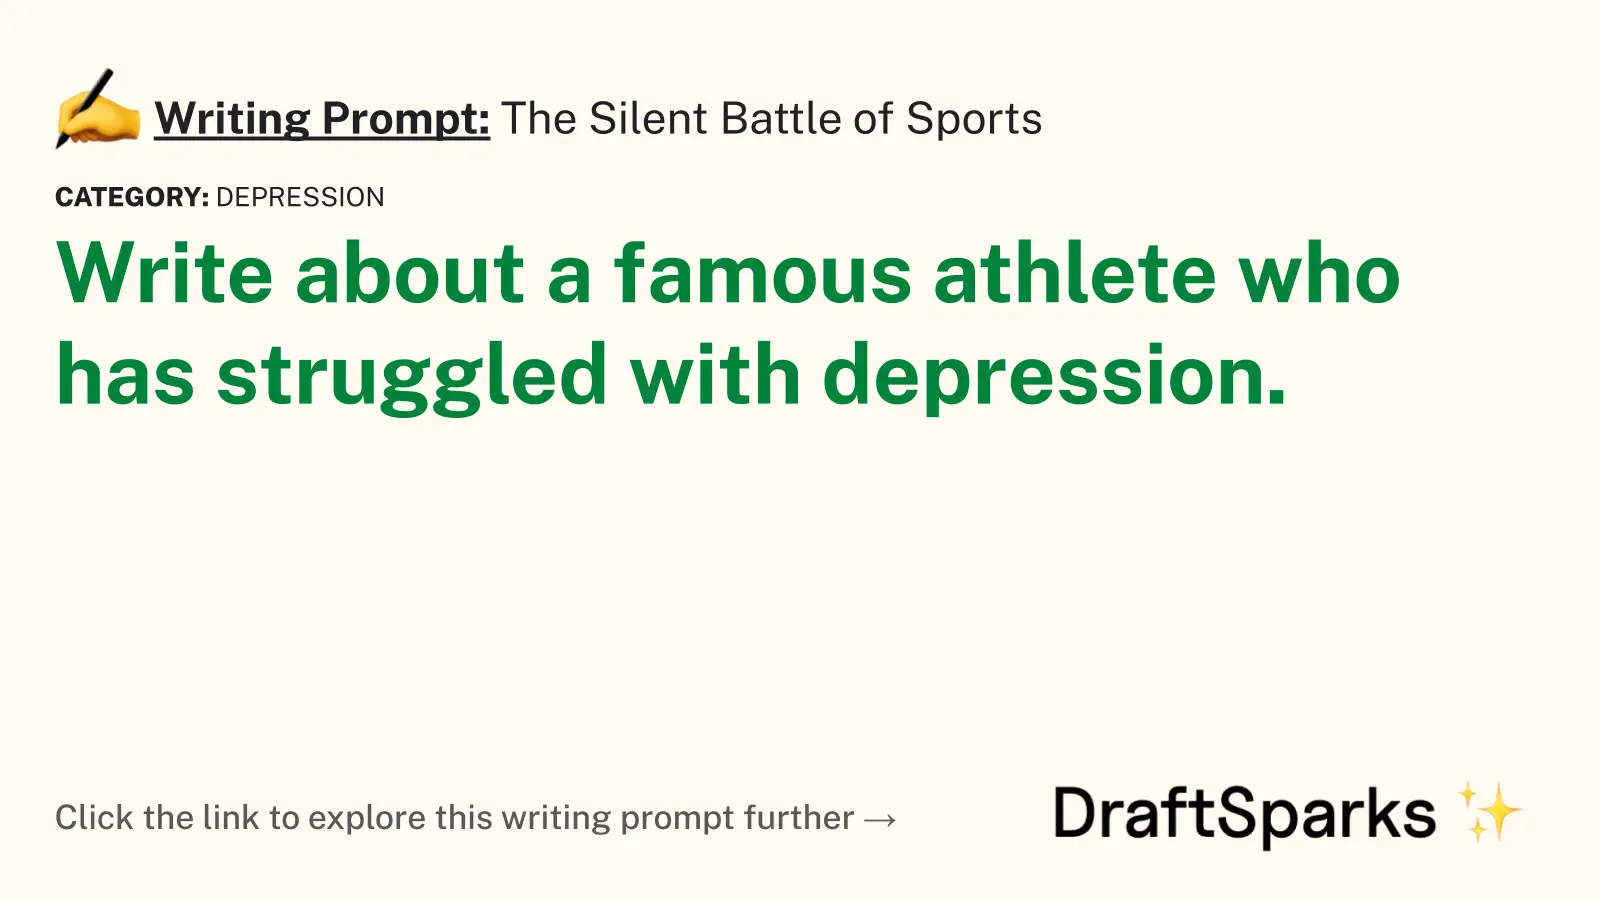 The Silent Battle of Sports